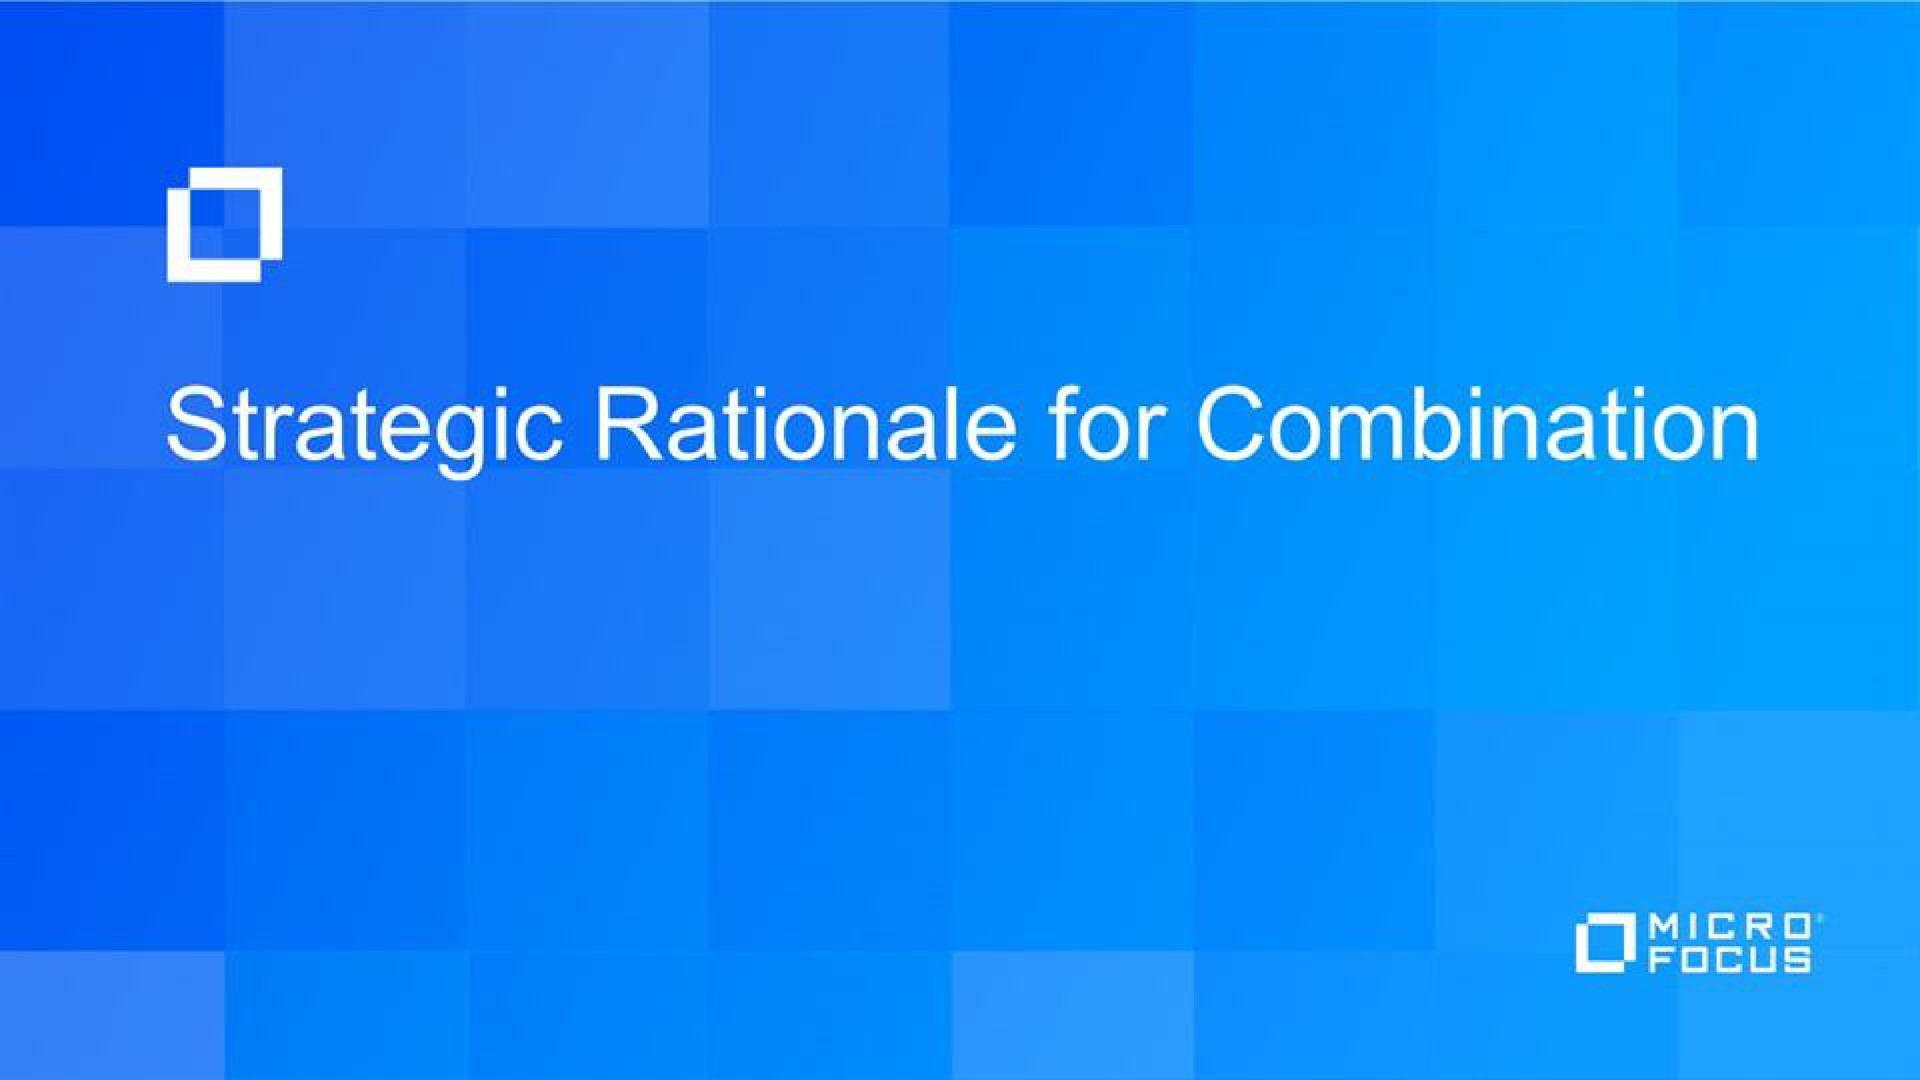 i strategic rationale for combination | Micro Focus